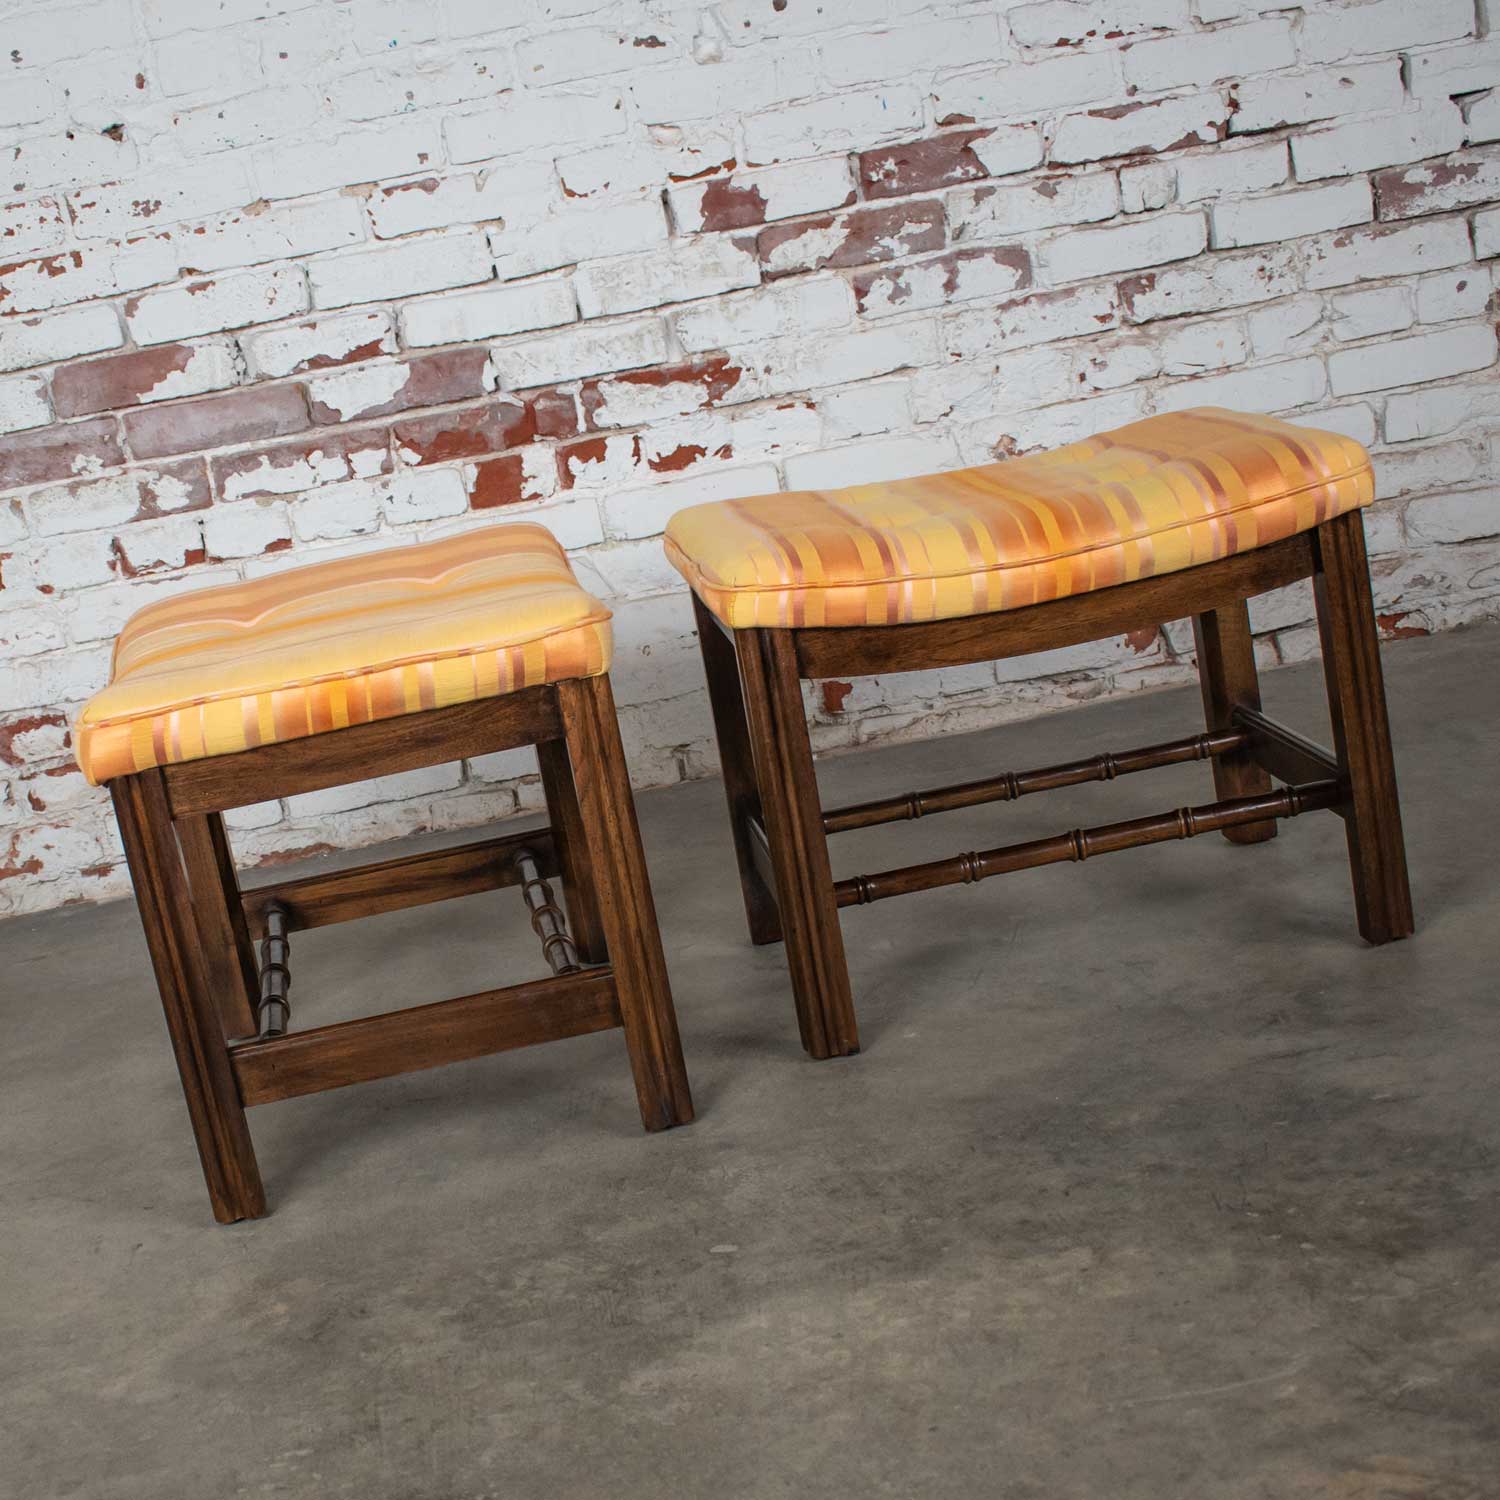 Chinese Chippendale Pair Foot Stools in Orange & Yellow Stripe Upholstery by Burlington House Furniture